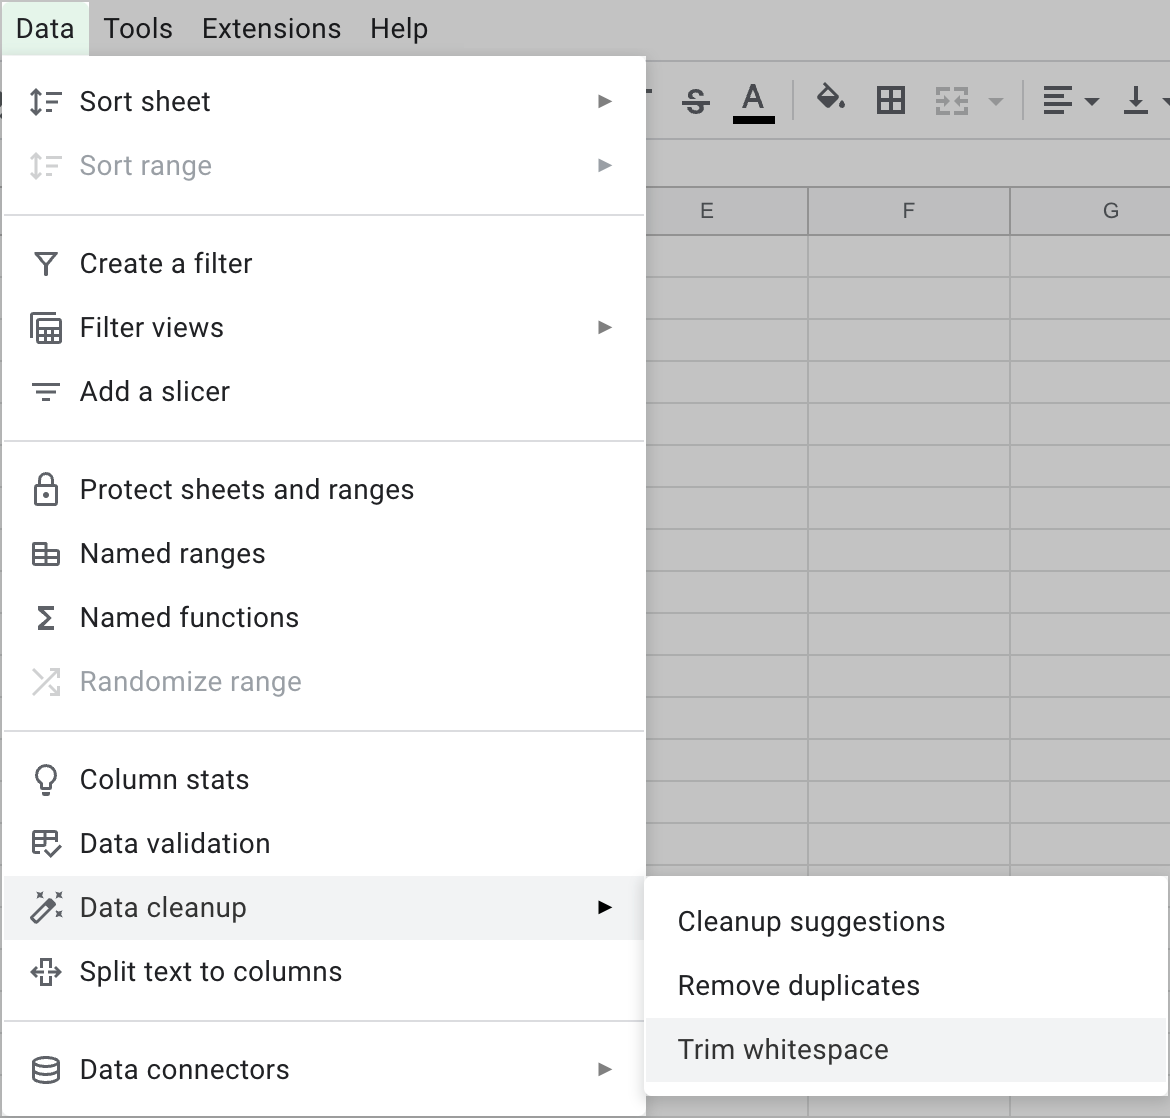 Find the Trim whitespace tool in the Google Sheets menu.